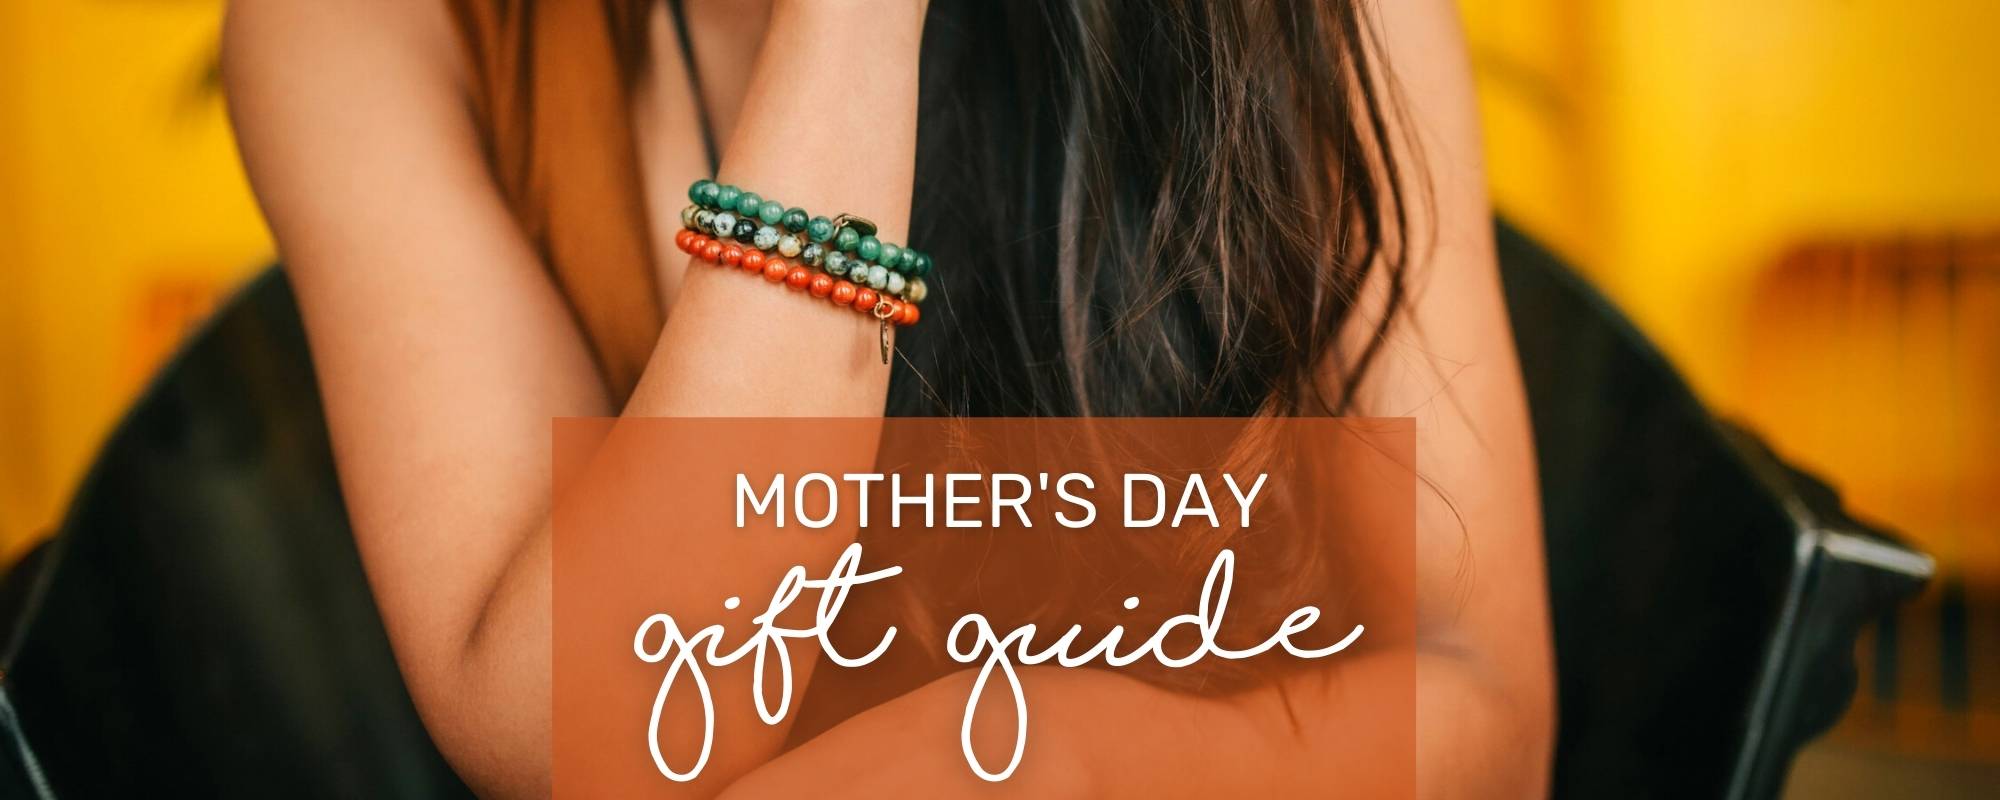 UK Mother’s Day SALE